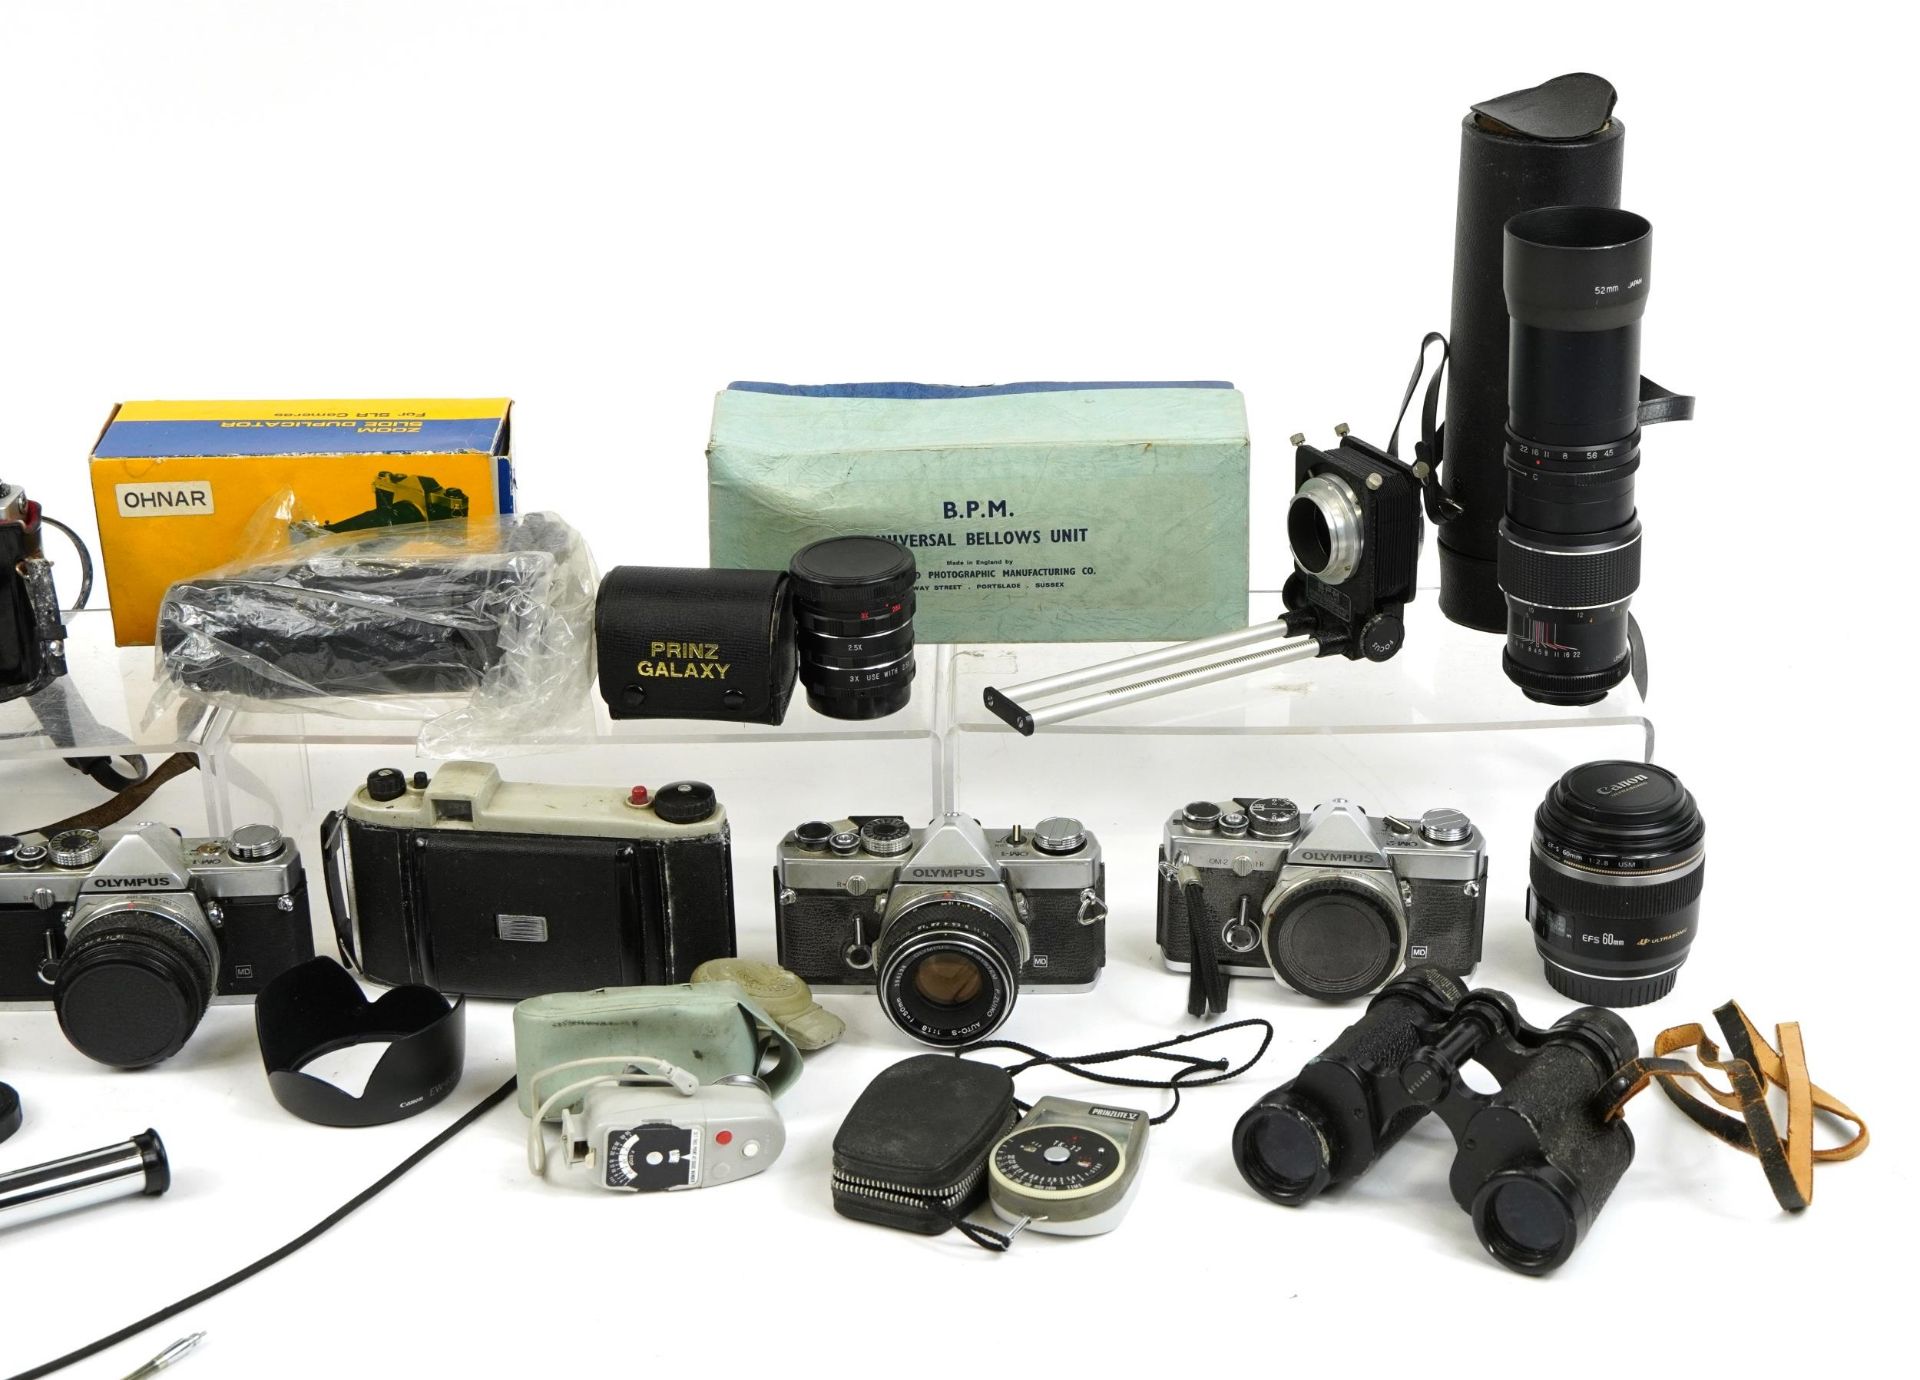 Vintage and later cameras, lenses and accessories including Olympus MD, Pentacon, Ilford, Sigma - Image 3 of 3